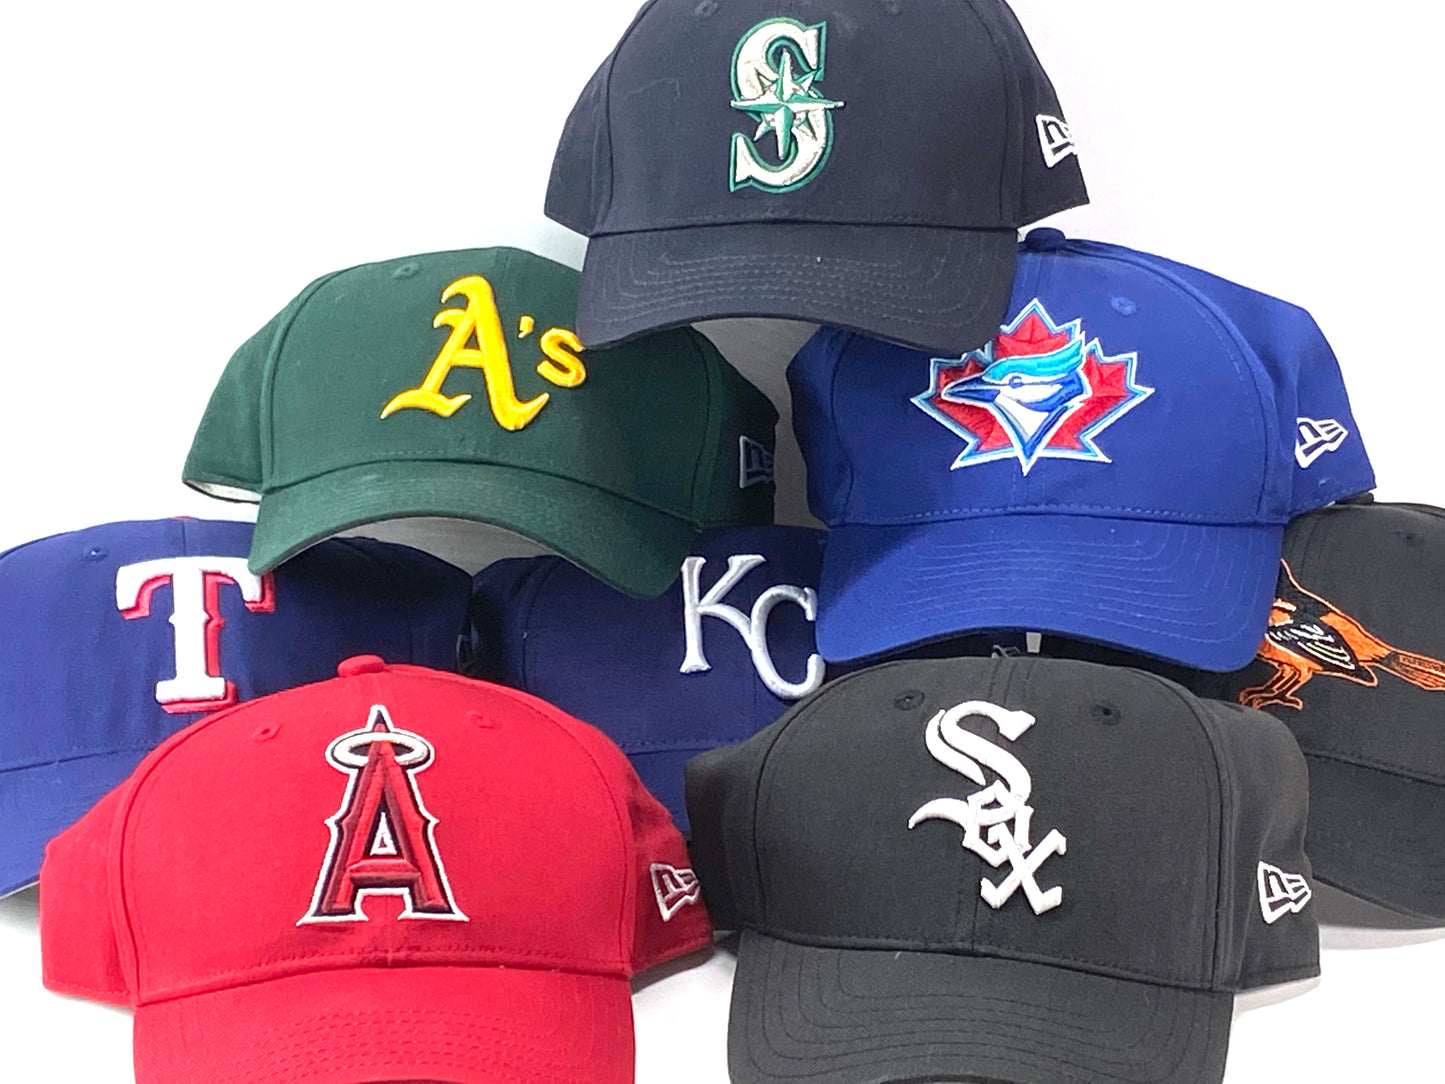 American League Vintage Late '90's MLB Replica Baseball Hats (New) by New Era